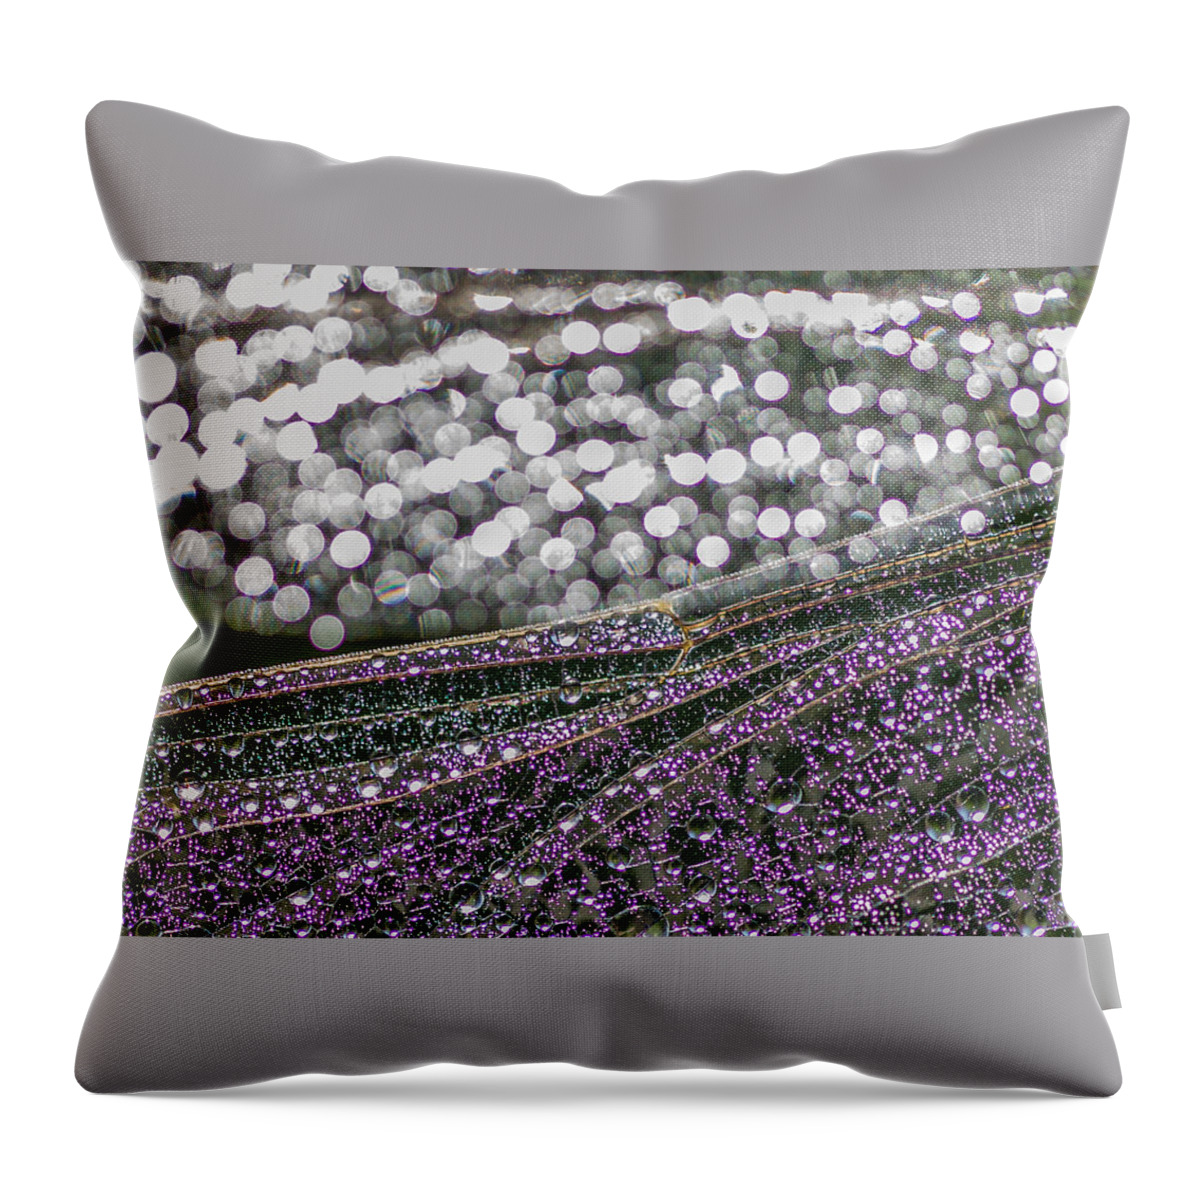 Dragonfly Throw Pillow featuring the photograph Dragonflybirth by Niklas Banowski Wildlifephoto